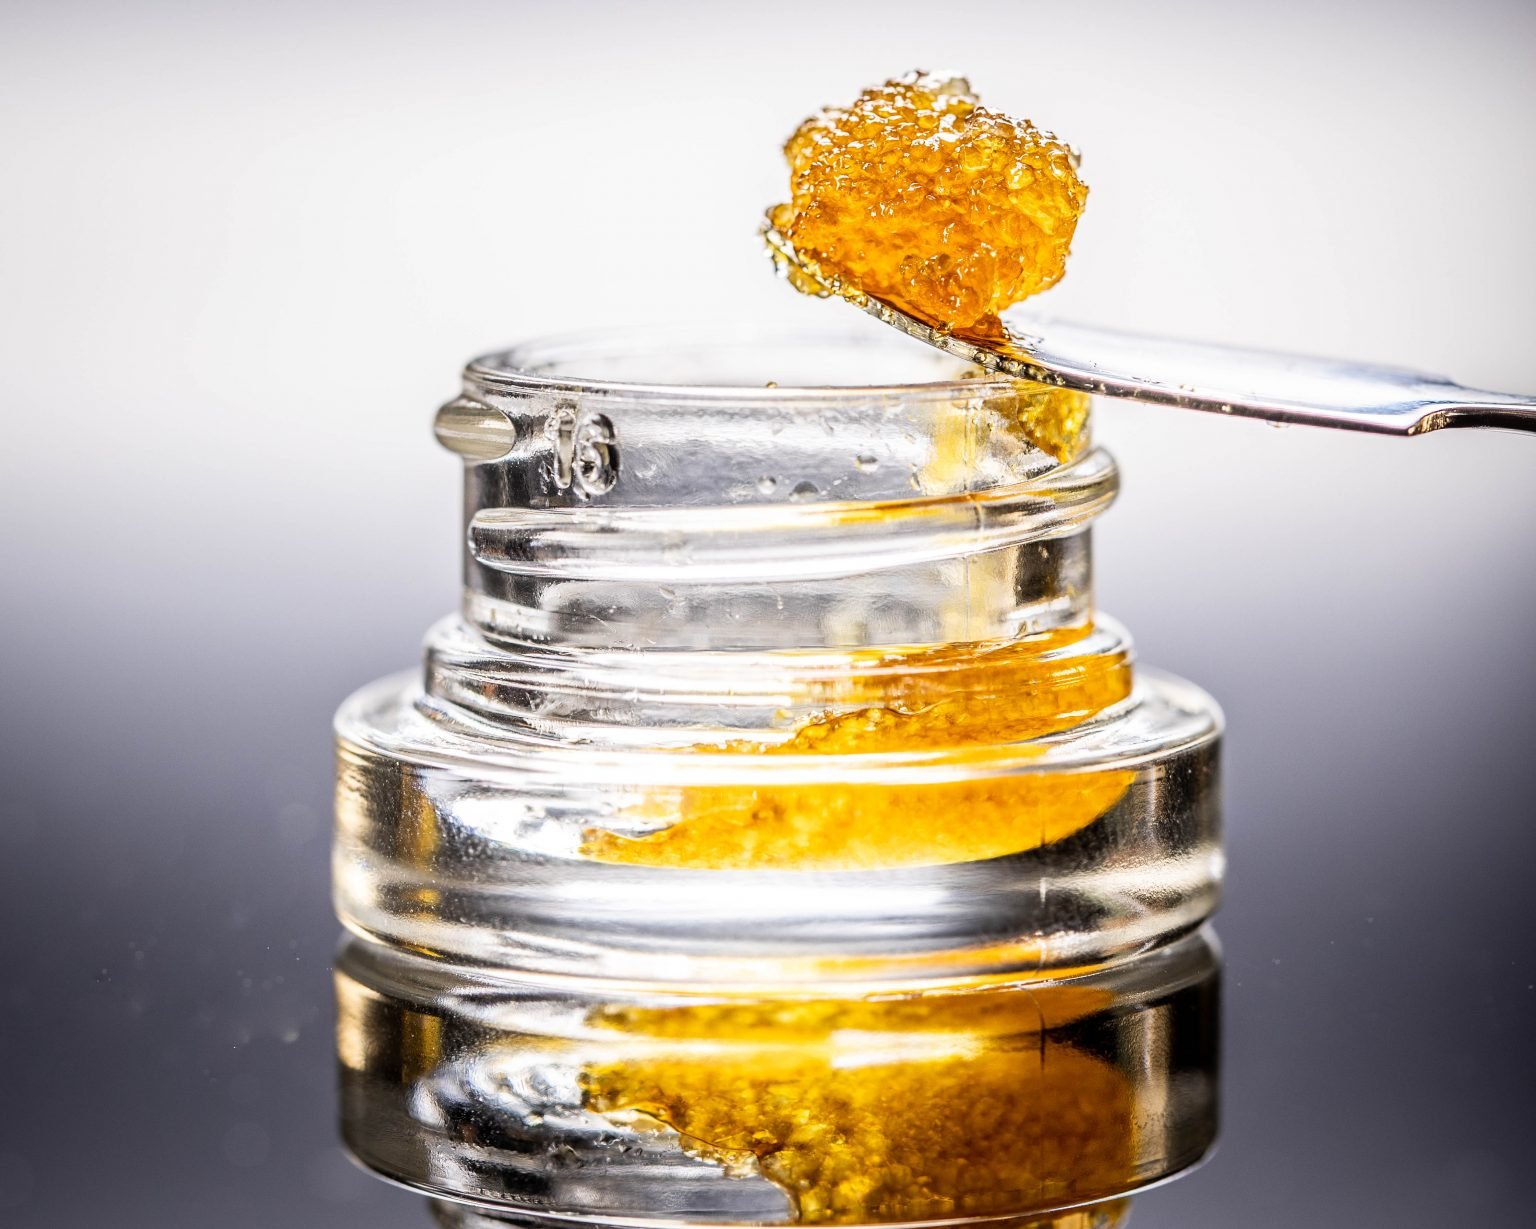 710-what-are-the-origins-of-dab-day-chronic-creations